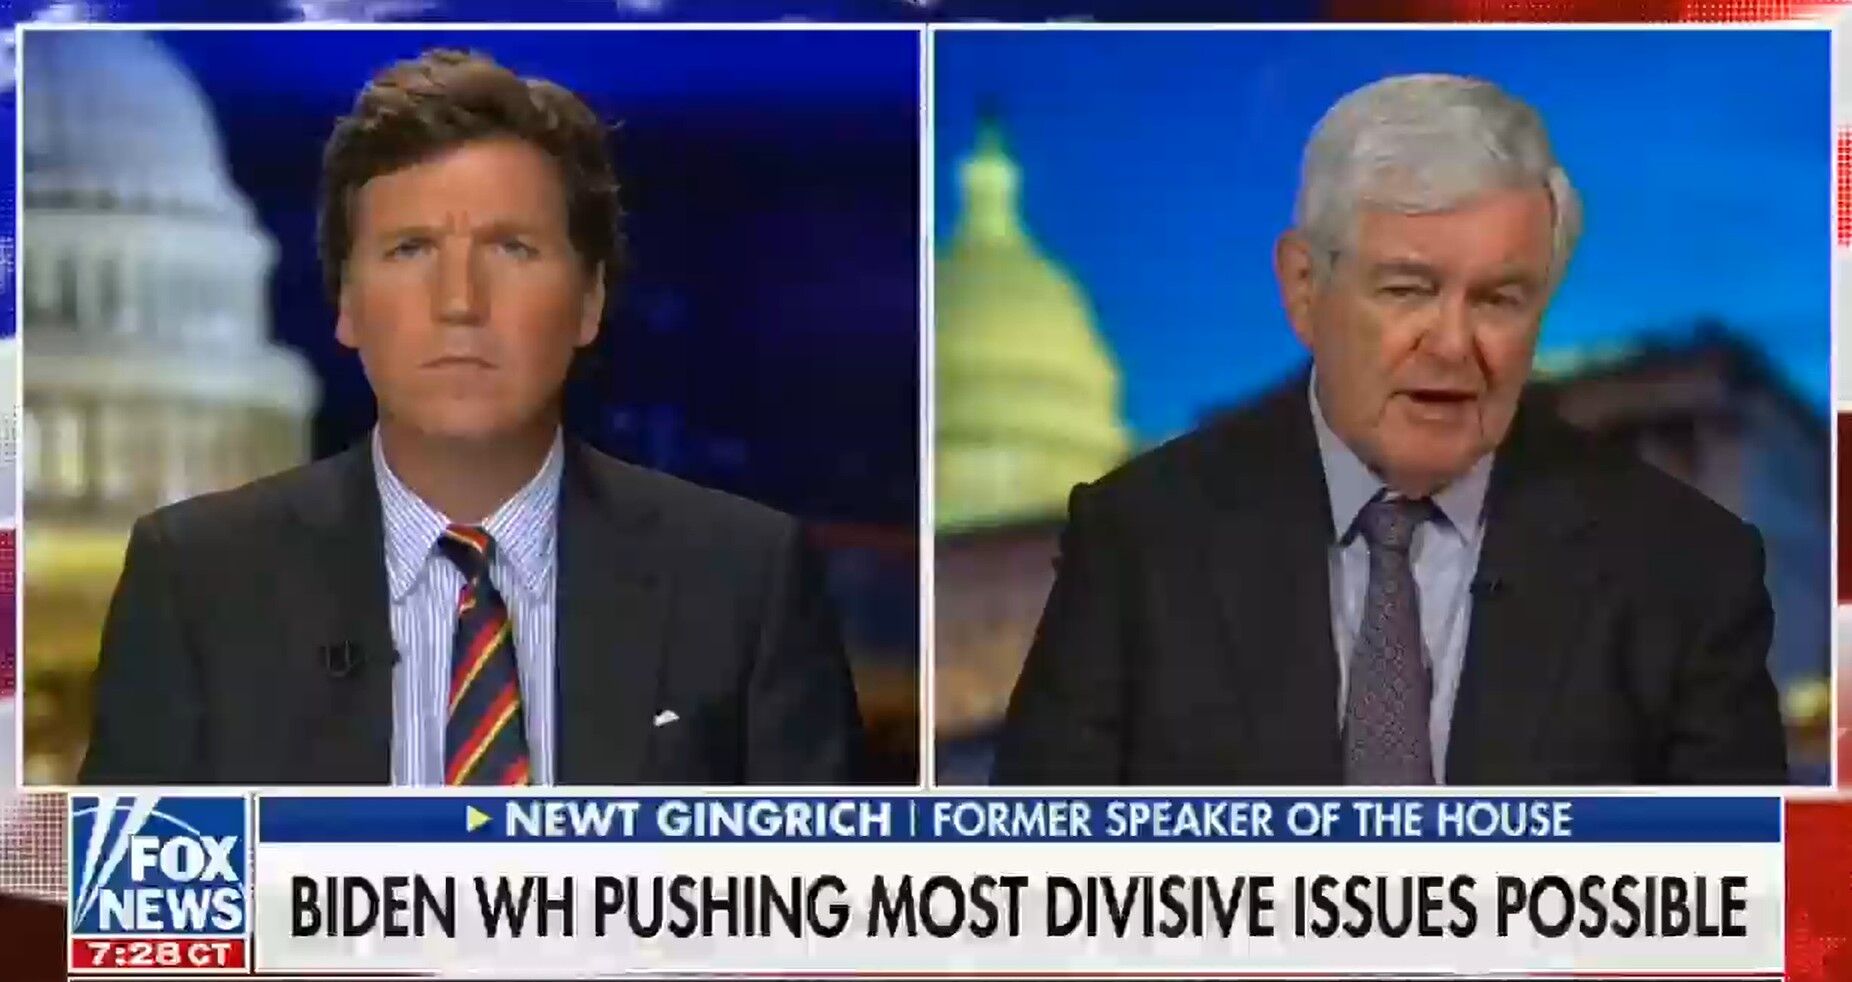 Tucker Carlson and Newt Gingrich